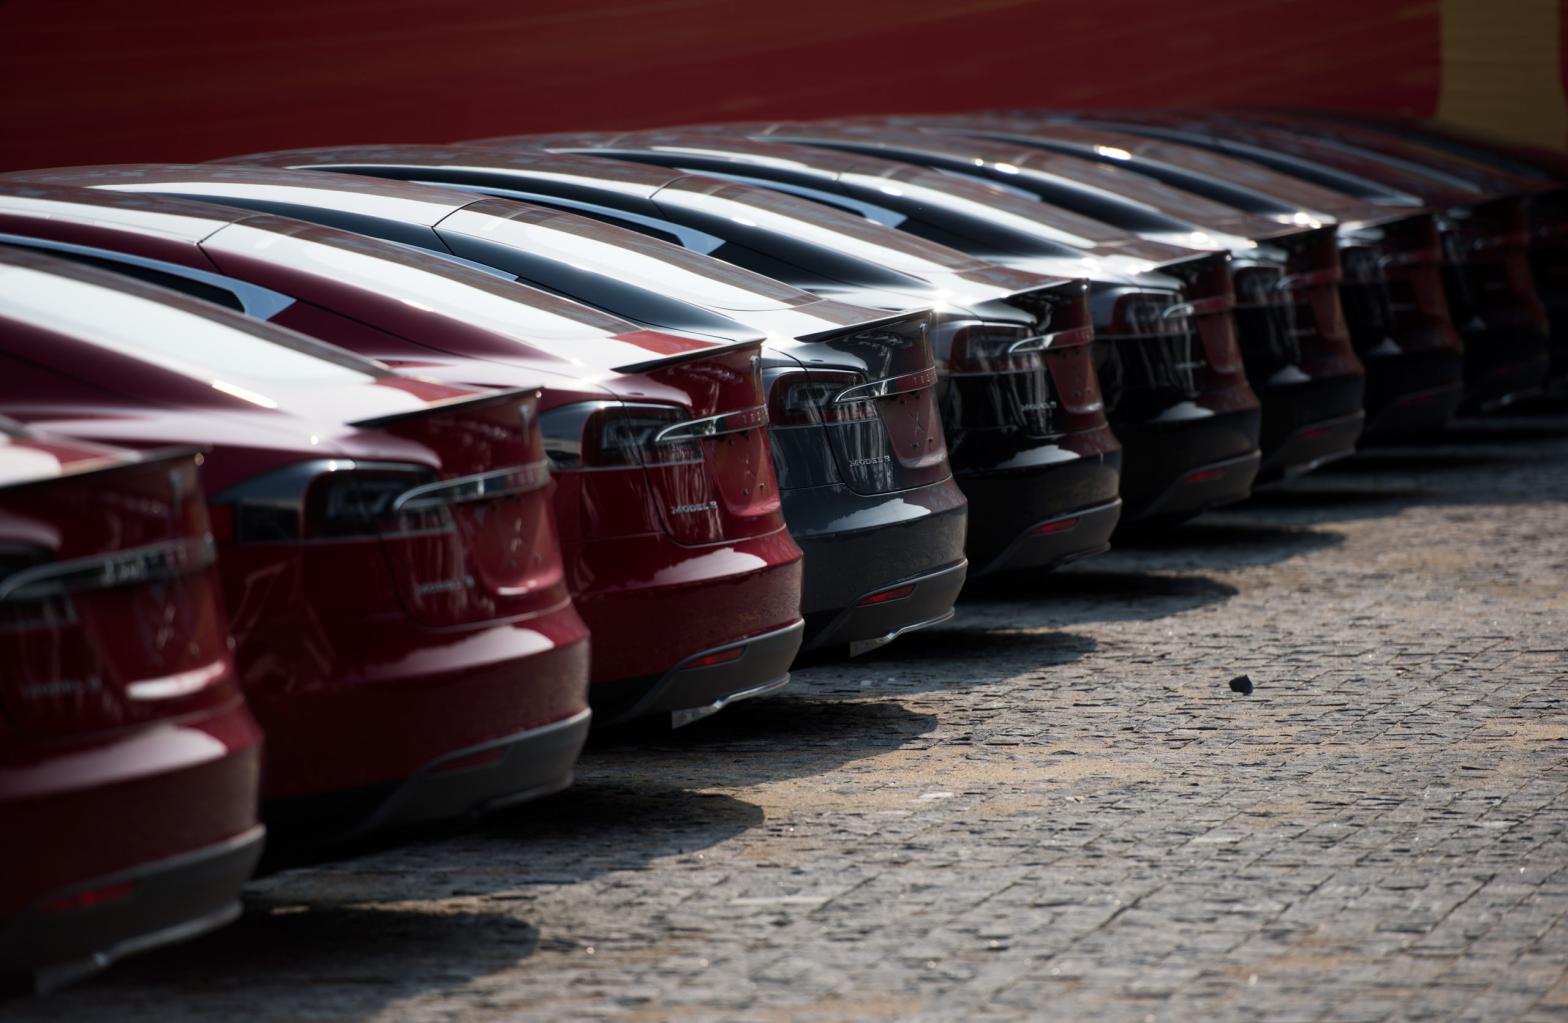 This picture taken on March 17, 2015, shows Tesla Model S vehicles parked outside a car dealership in Shanghai.  (Photo: Johannes Eisele, Getty Images)